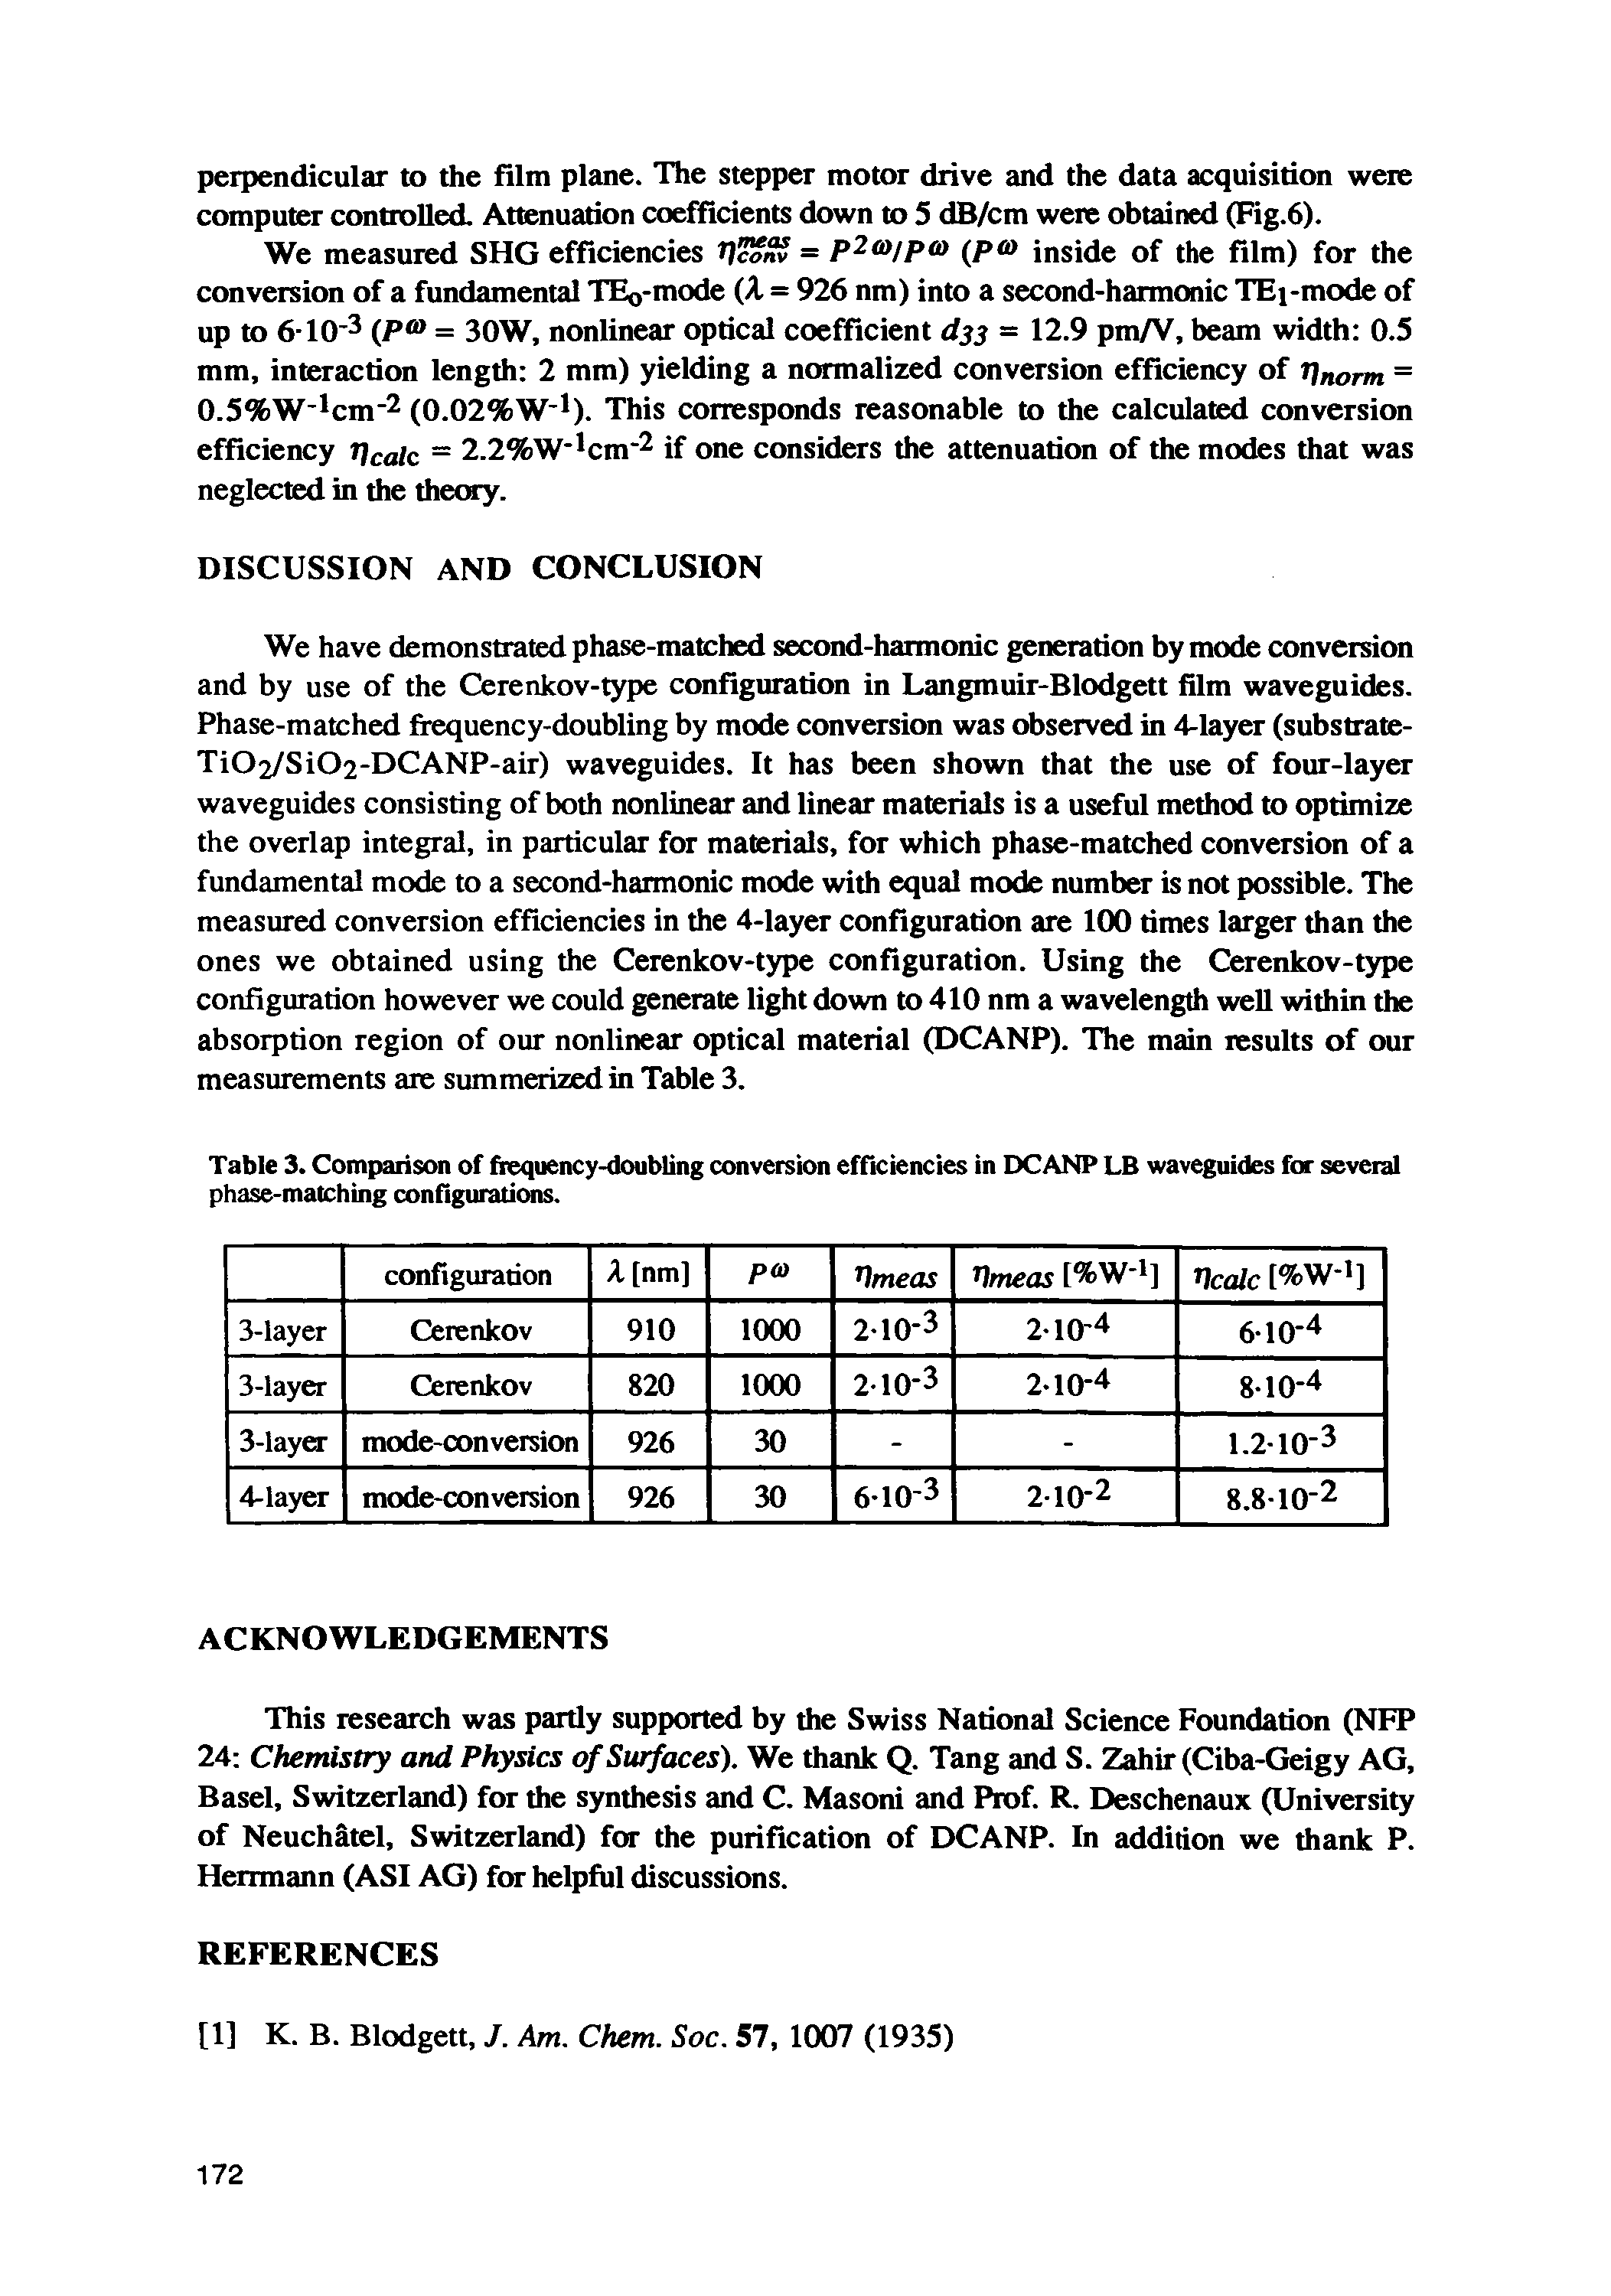 Table 3. Comparison of frequency-doubling conversion efficiencies in DCANP LB waveguides for several phase-matching configurations.